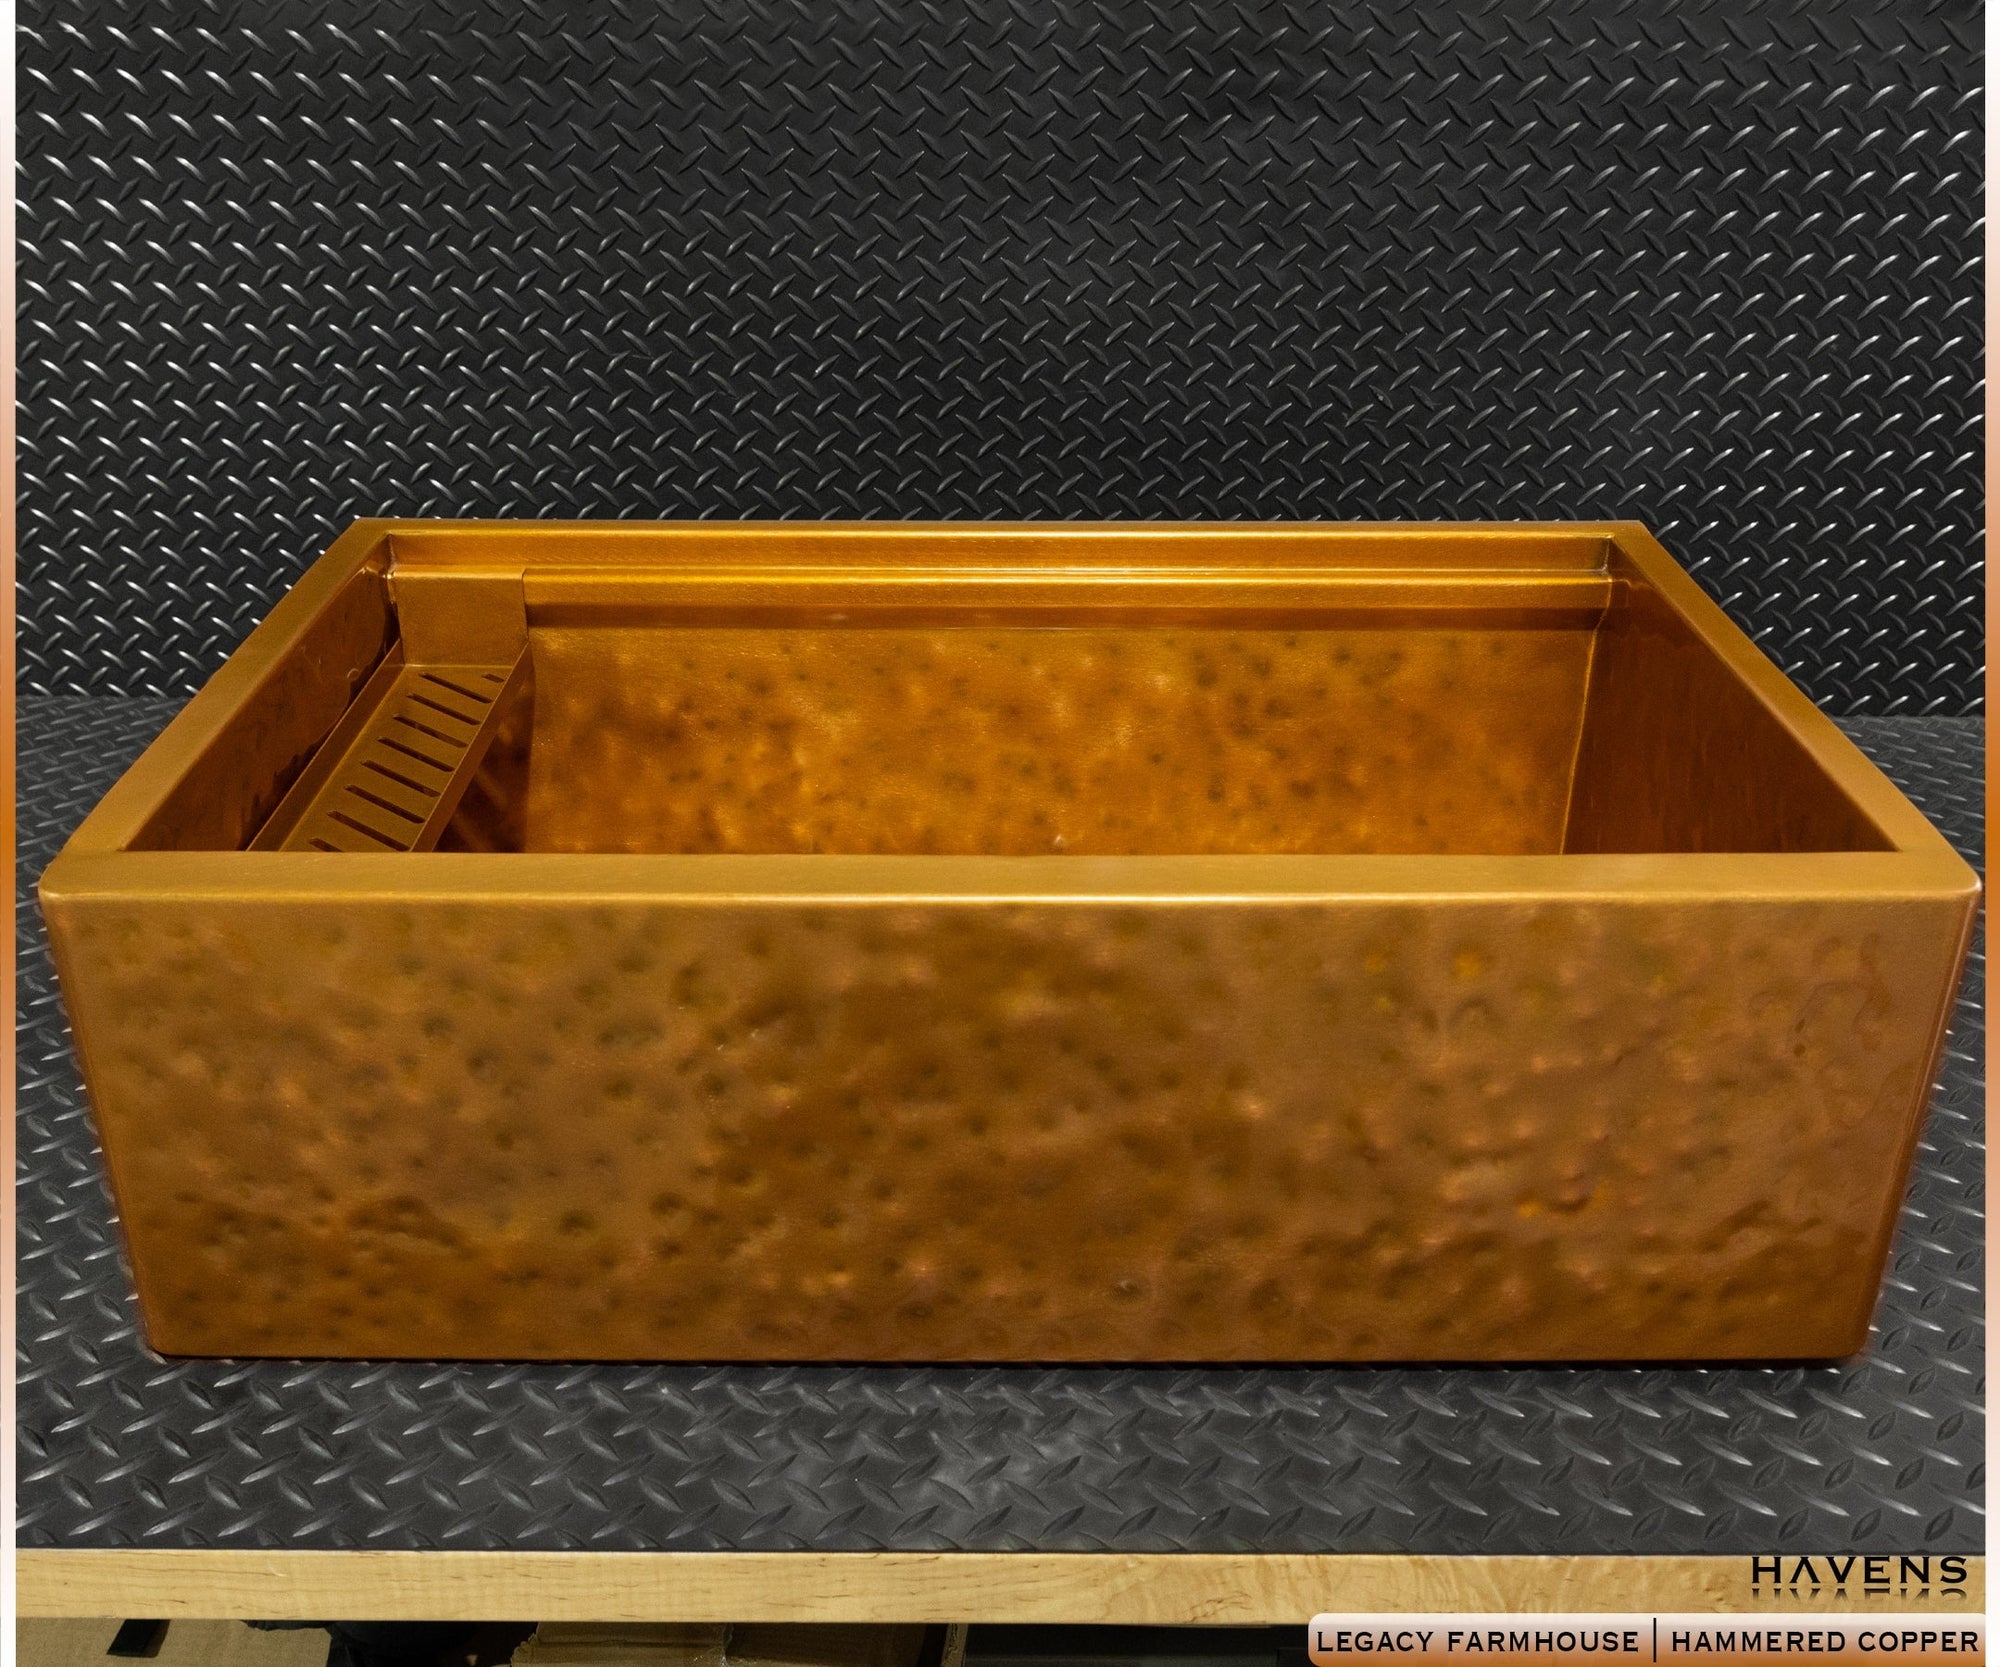 Legacy Farmhouse Sink - Micro-Hammered Copper